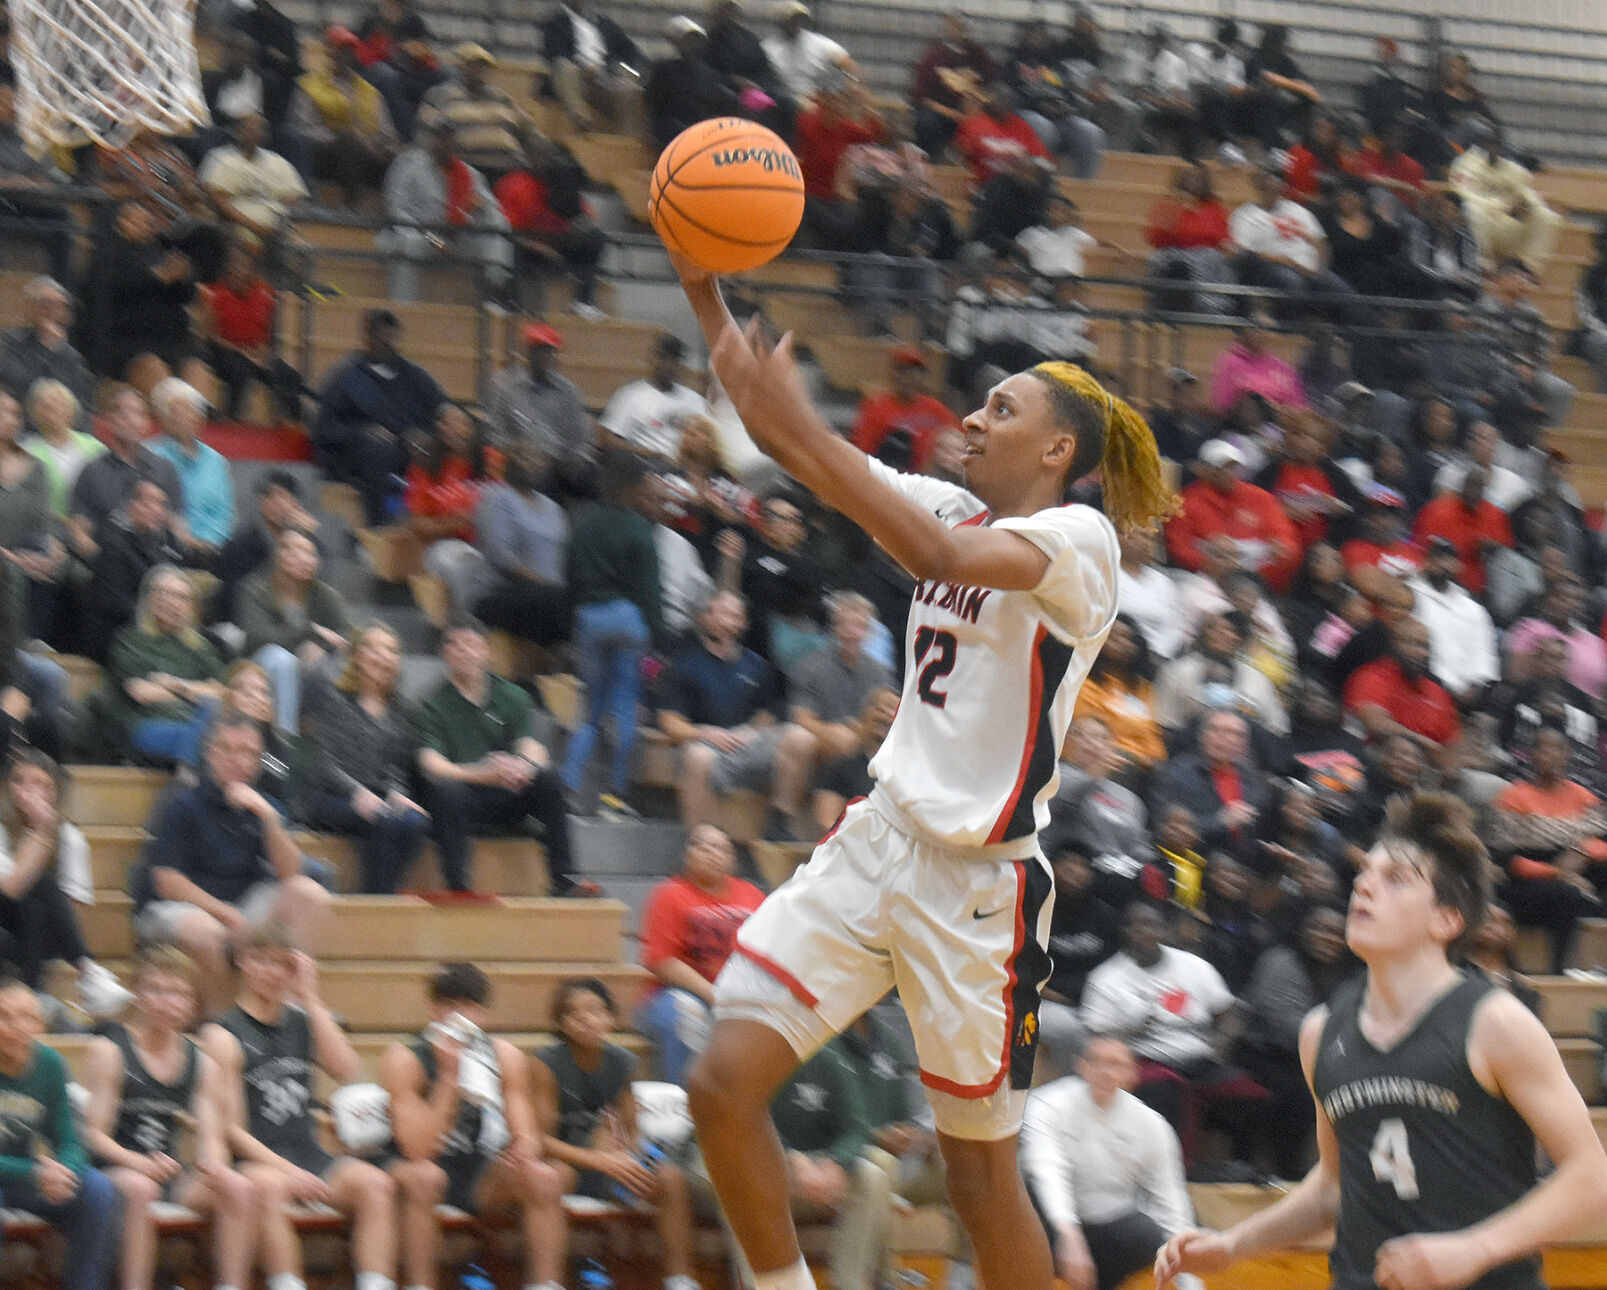 Isaiah Dennis: All-County Boys Basketball Player Wins POY with Stellar Shooting Skills